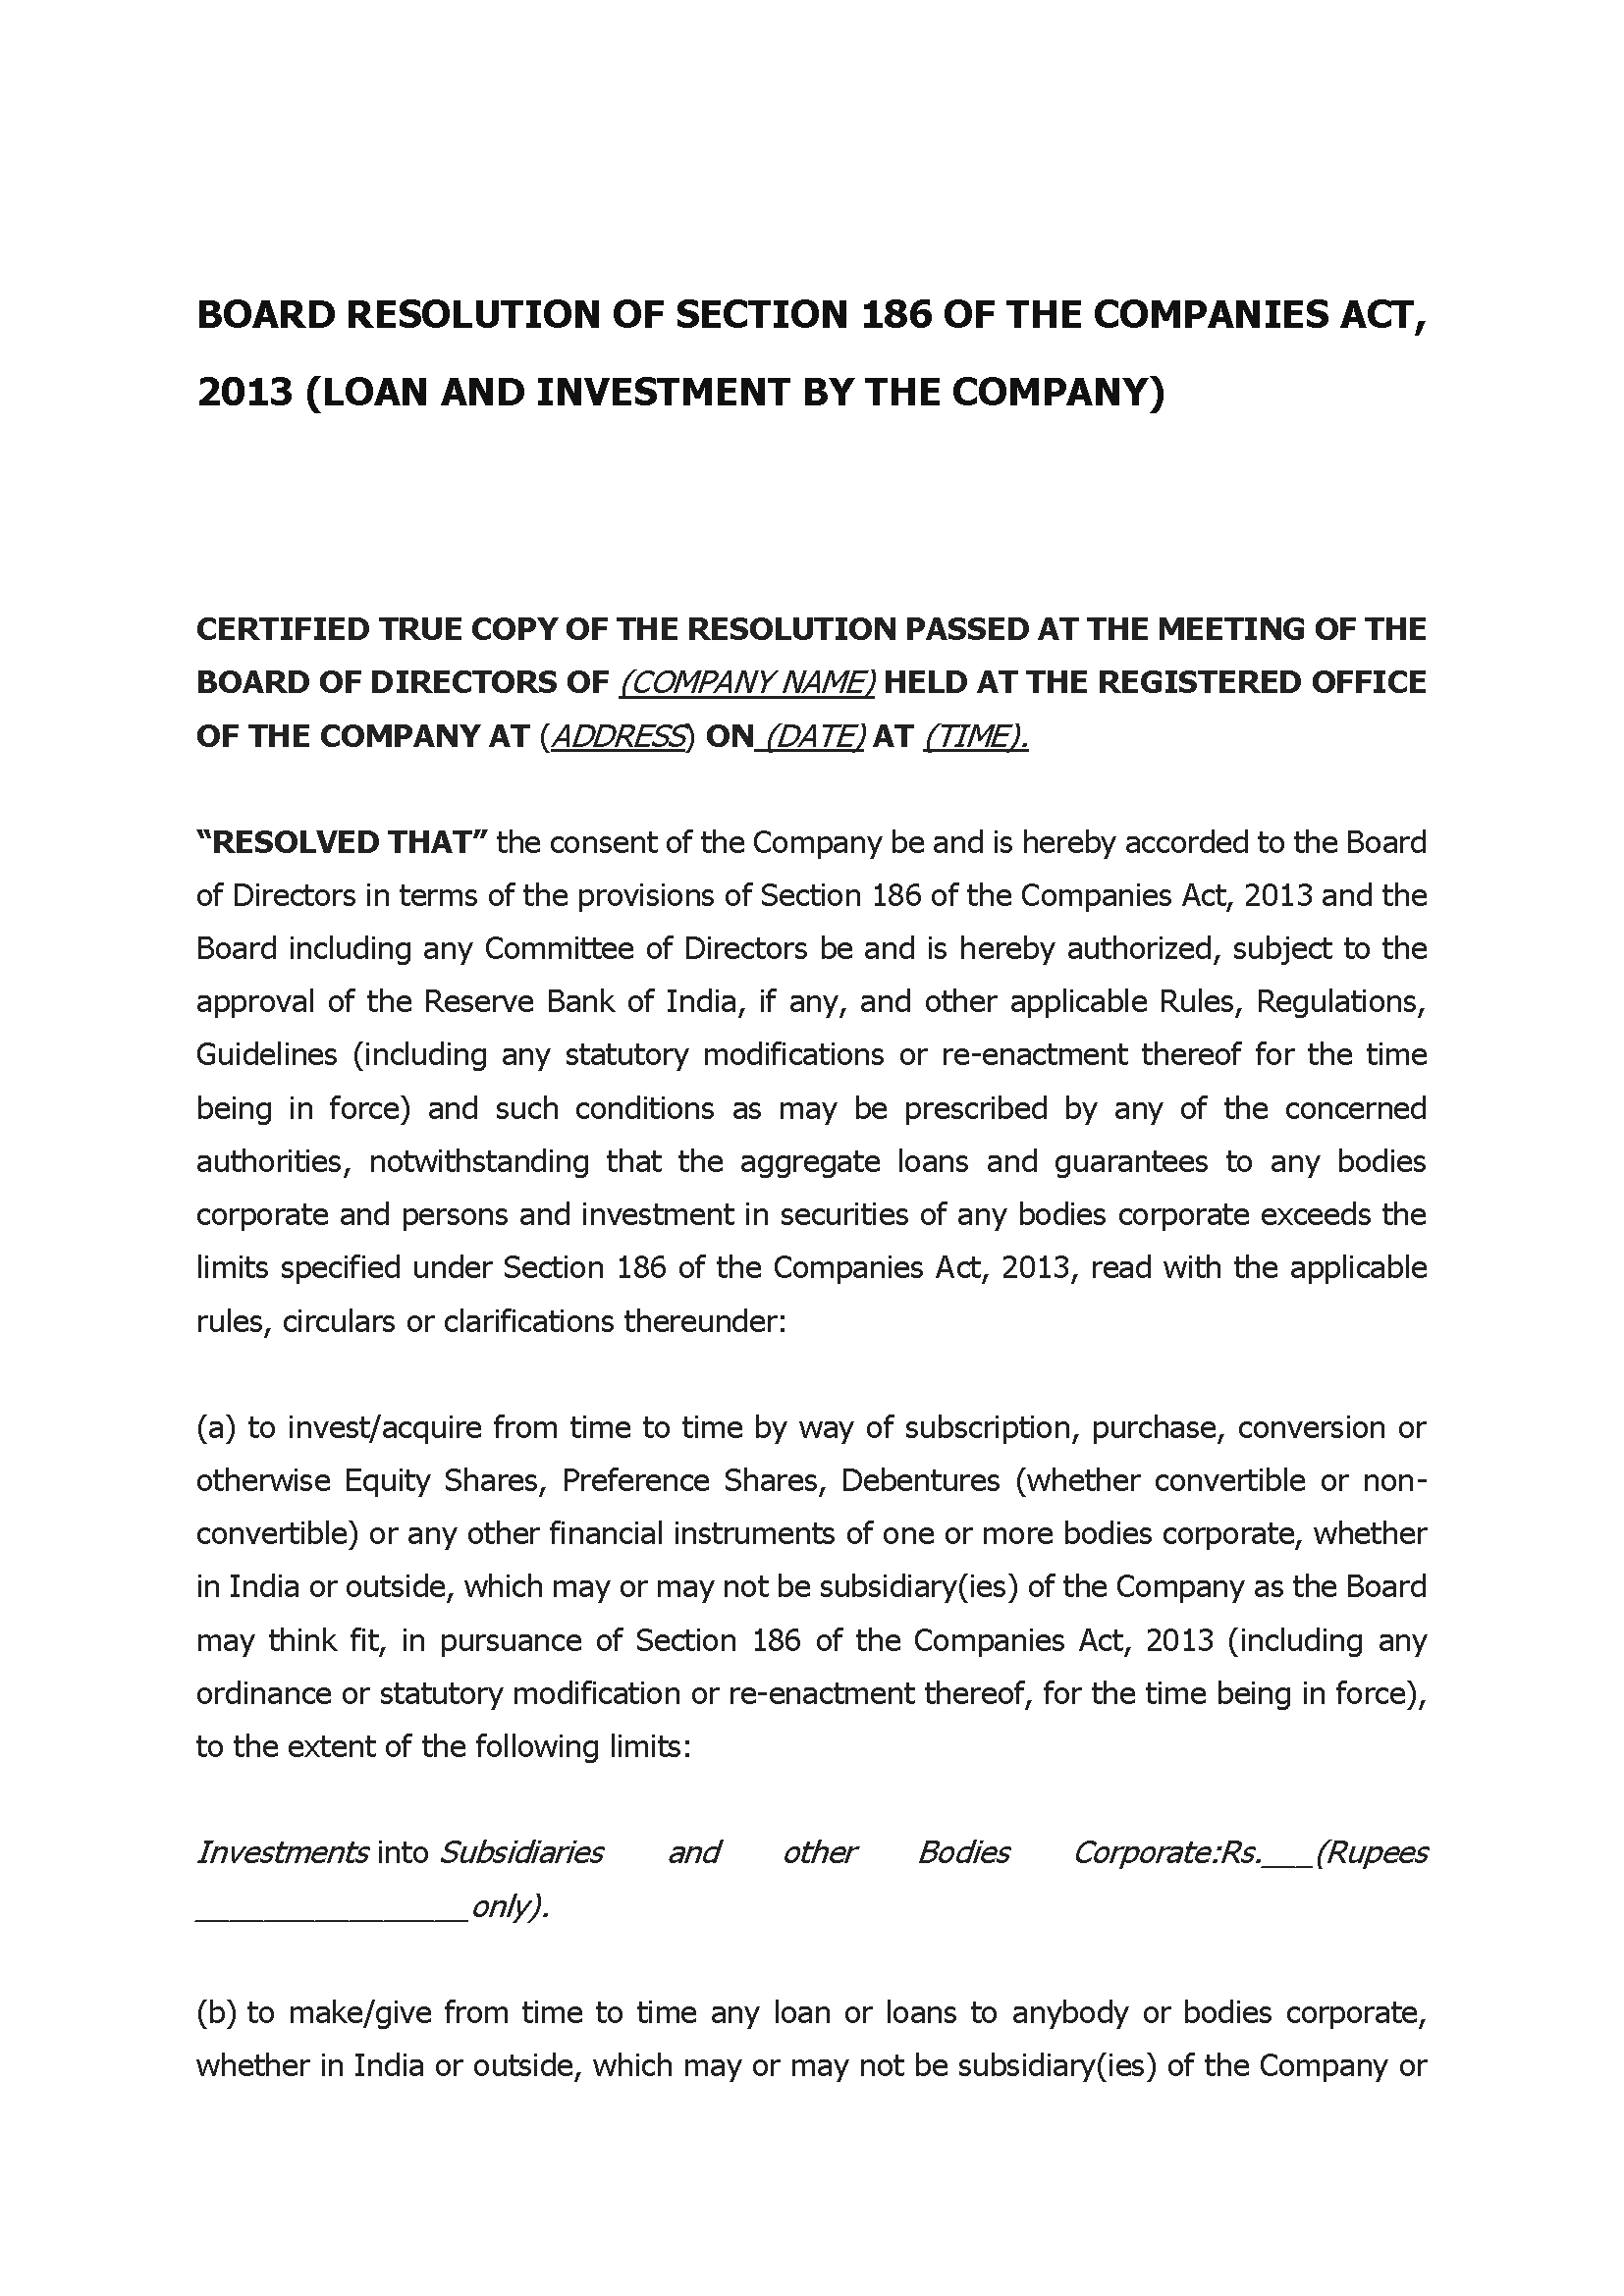 Board Resolution Of Section 186 Of The Companies Act, 2013 (Loan And Investment By The Company)